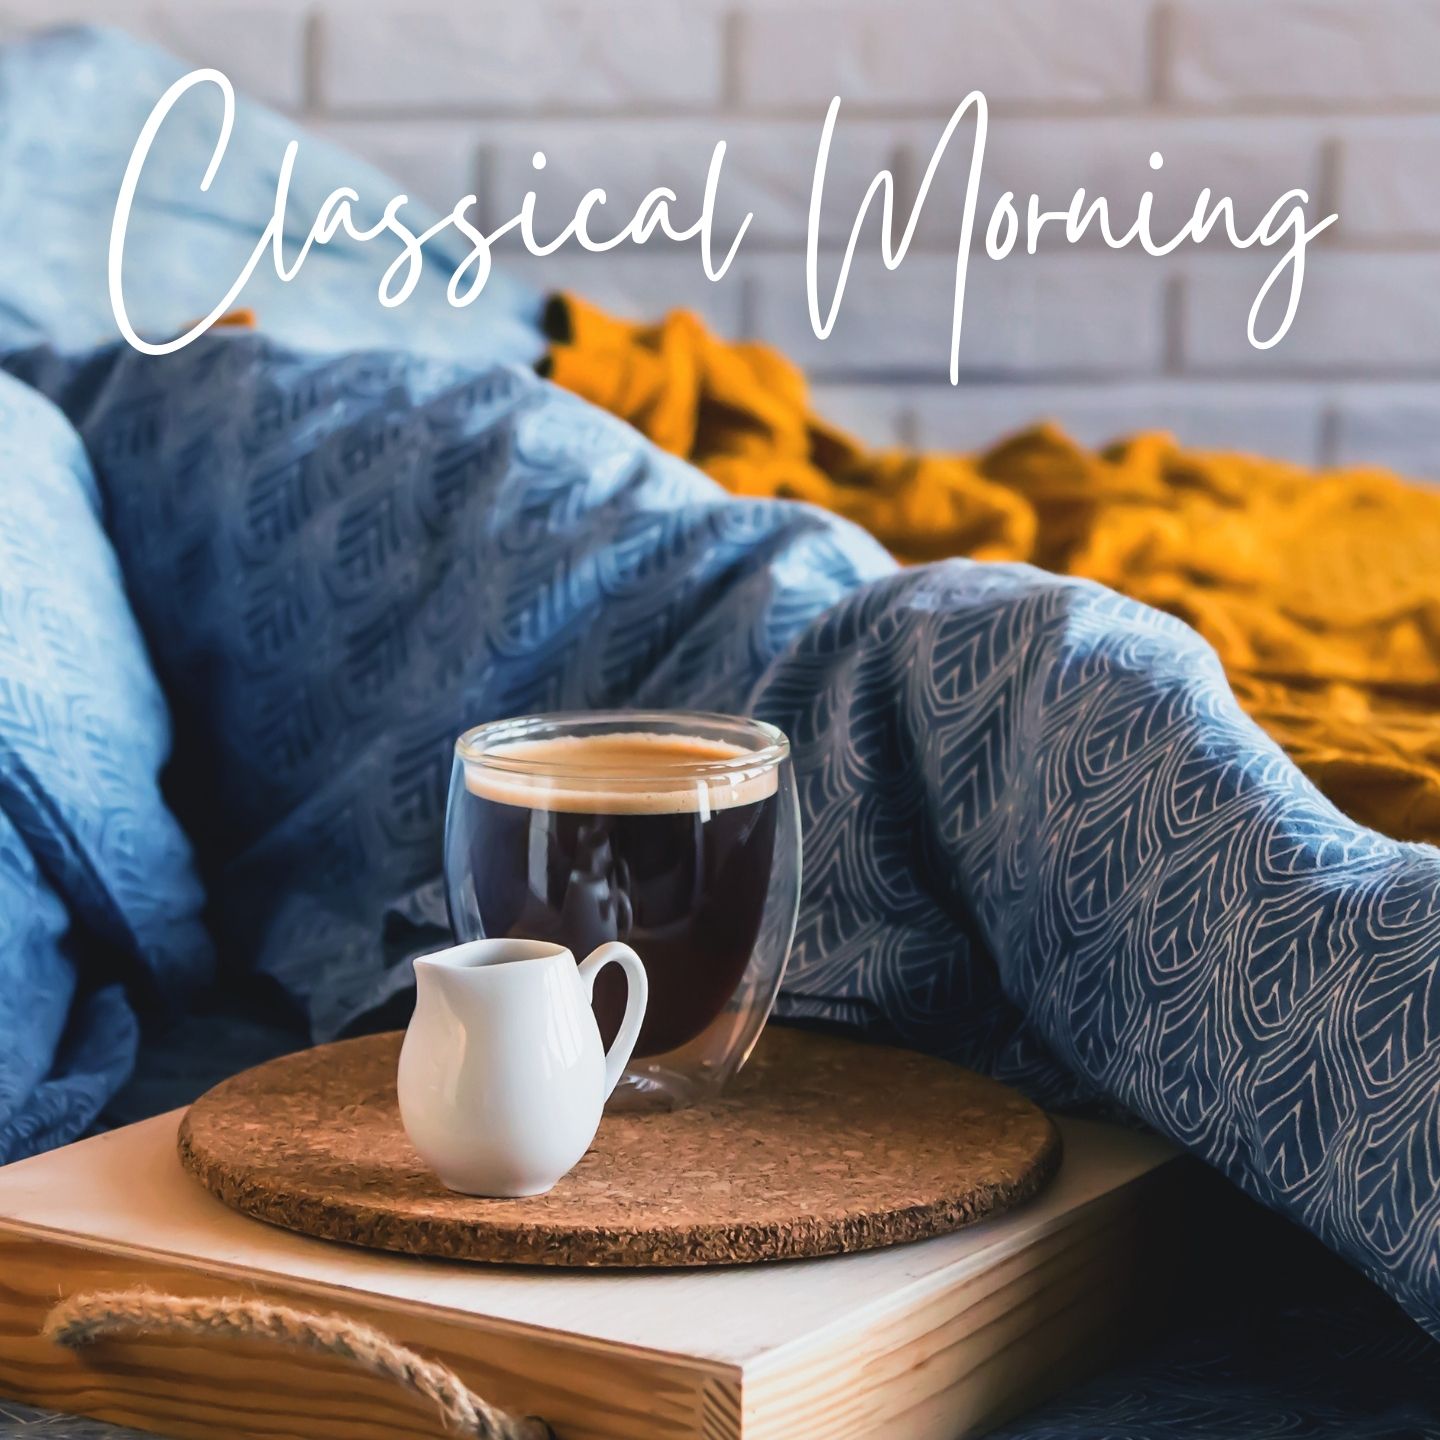 Classical Morning - Relaxing,Uplifting Classical Music